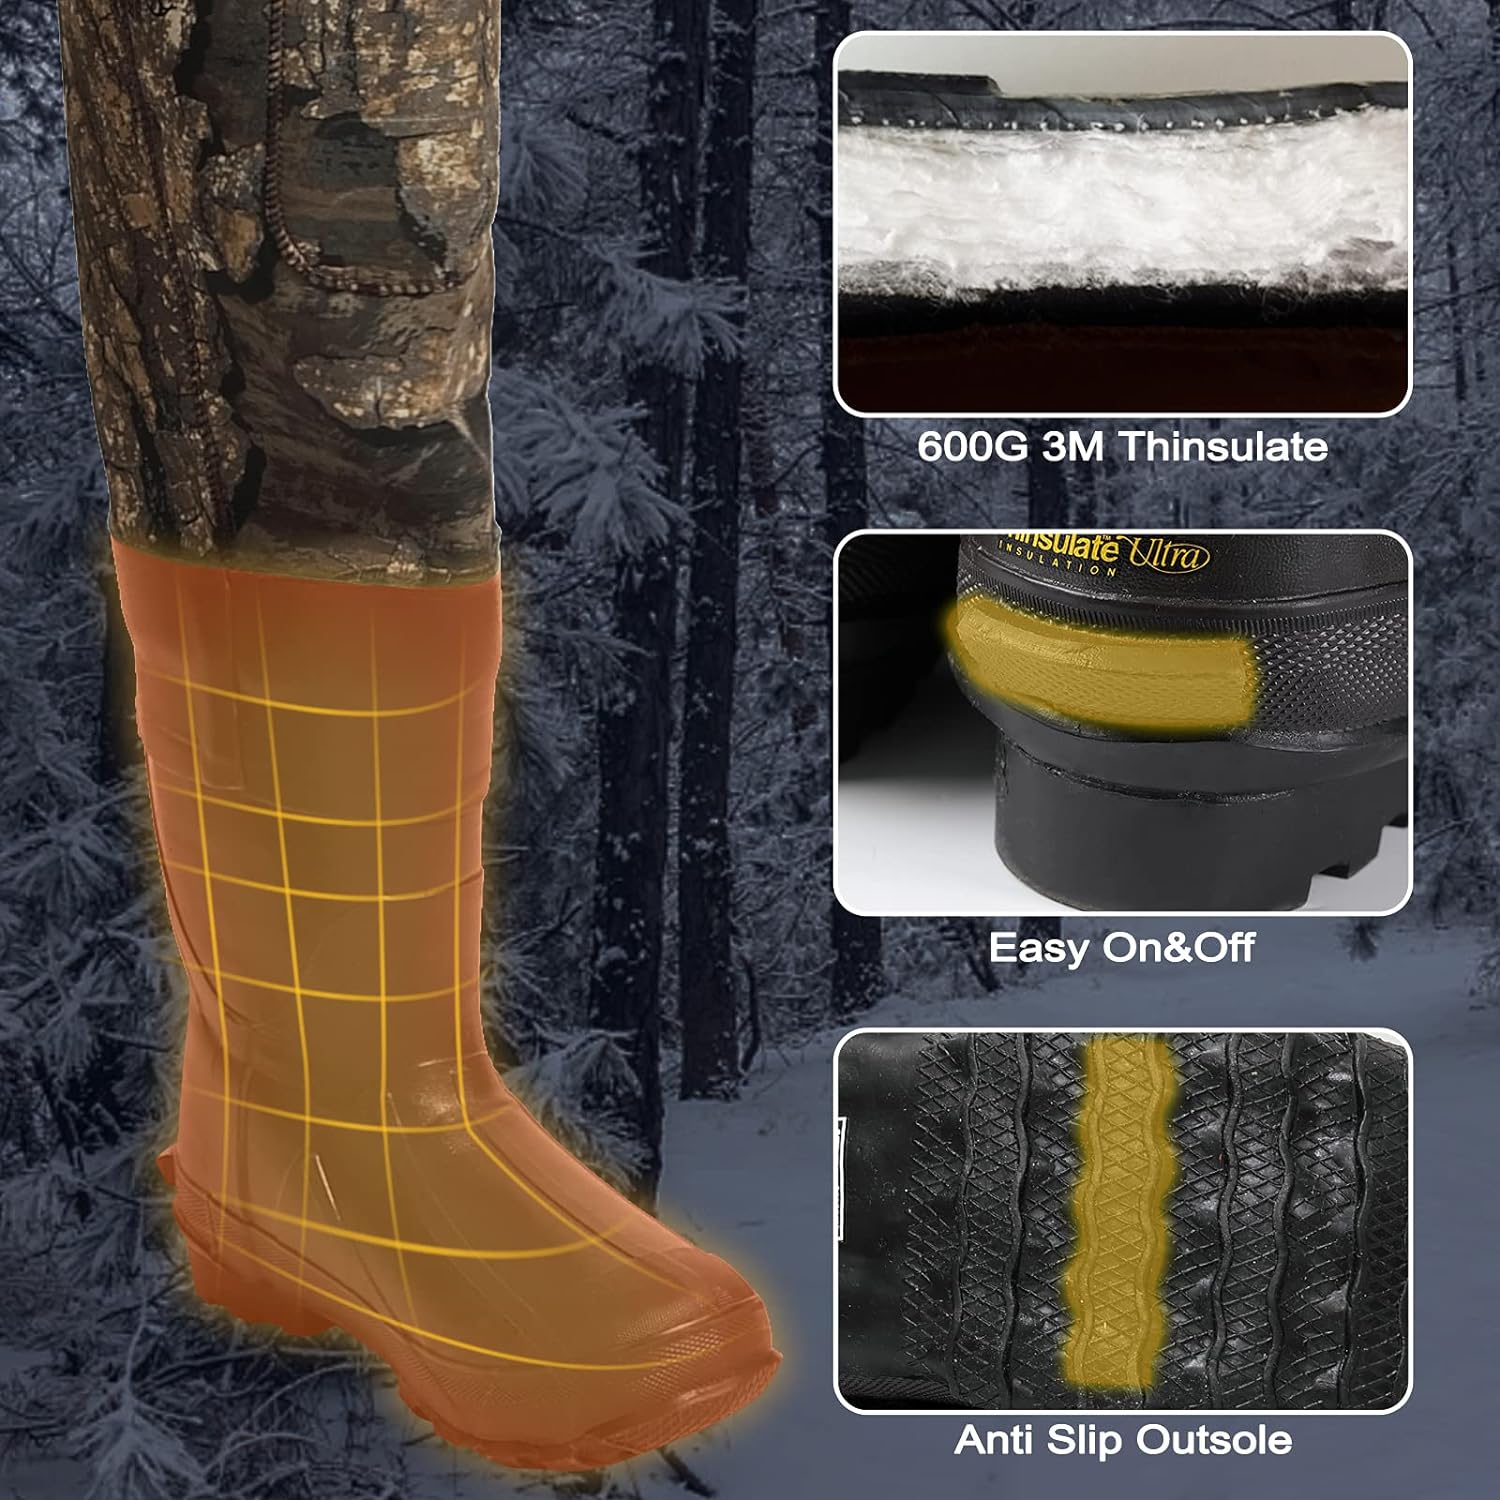 8 Fans Chest Waders,Hunting Waders For Men Realtree Timber With 600G Insulated,Waterproof Neoprene Bootfoot Wader For Hunting